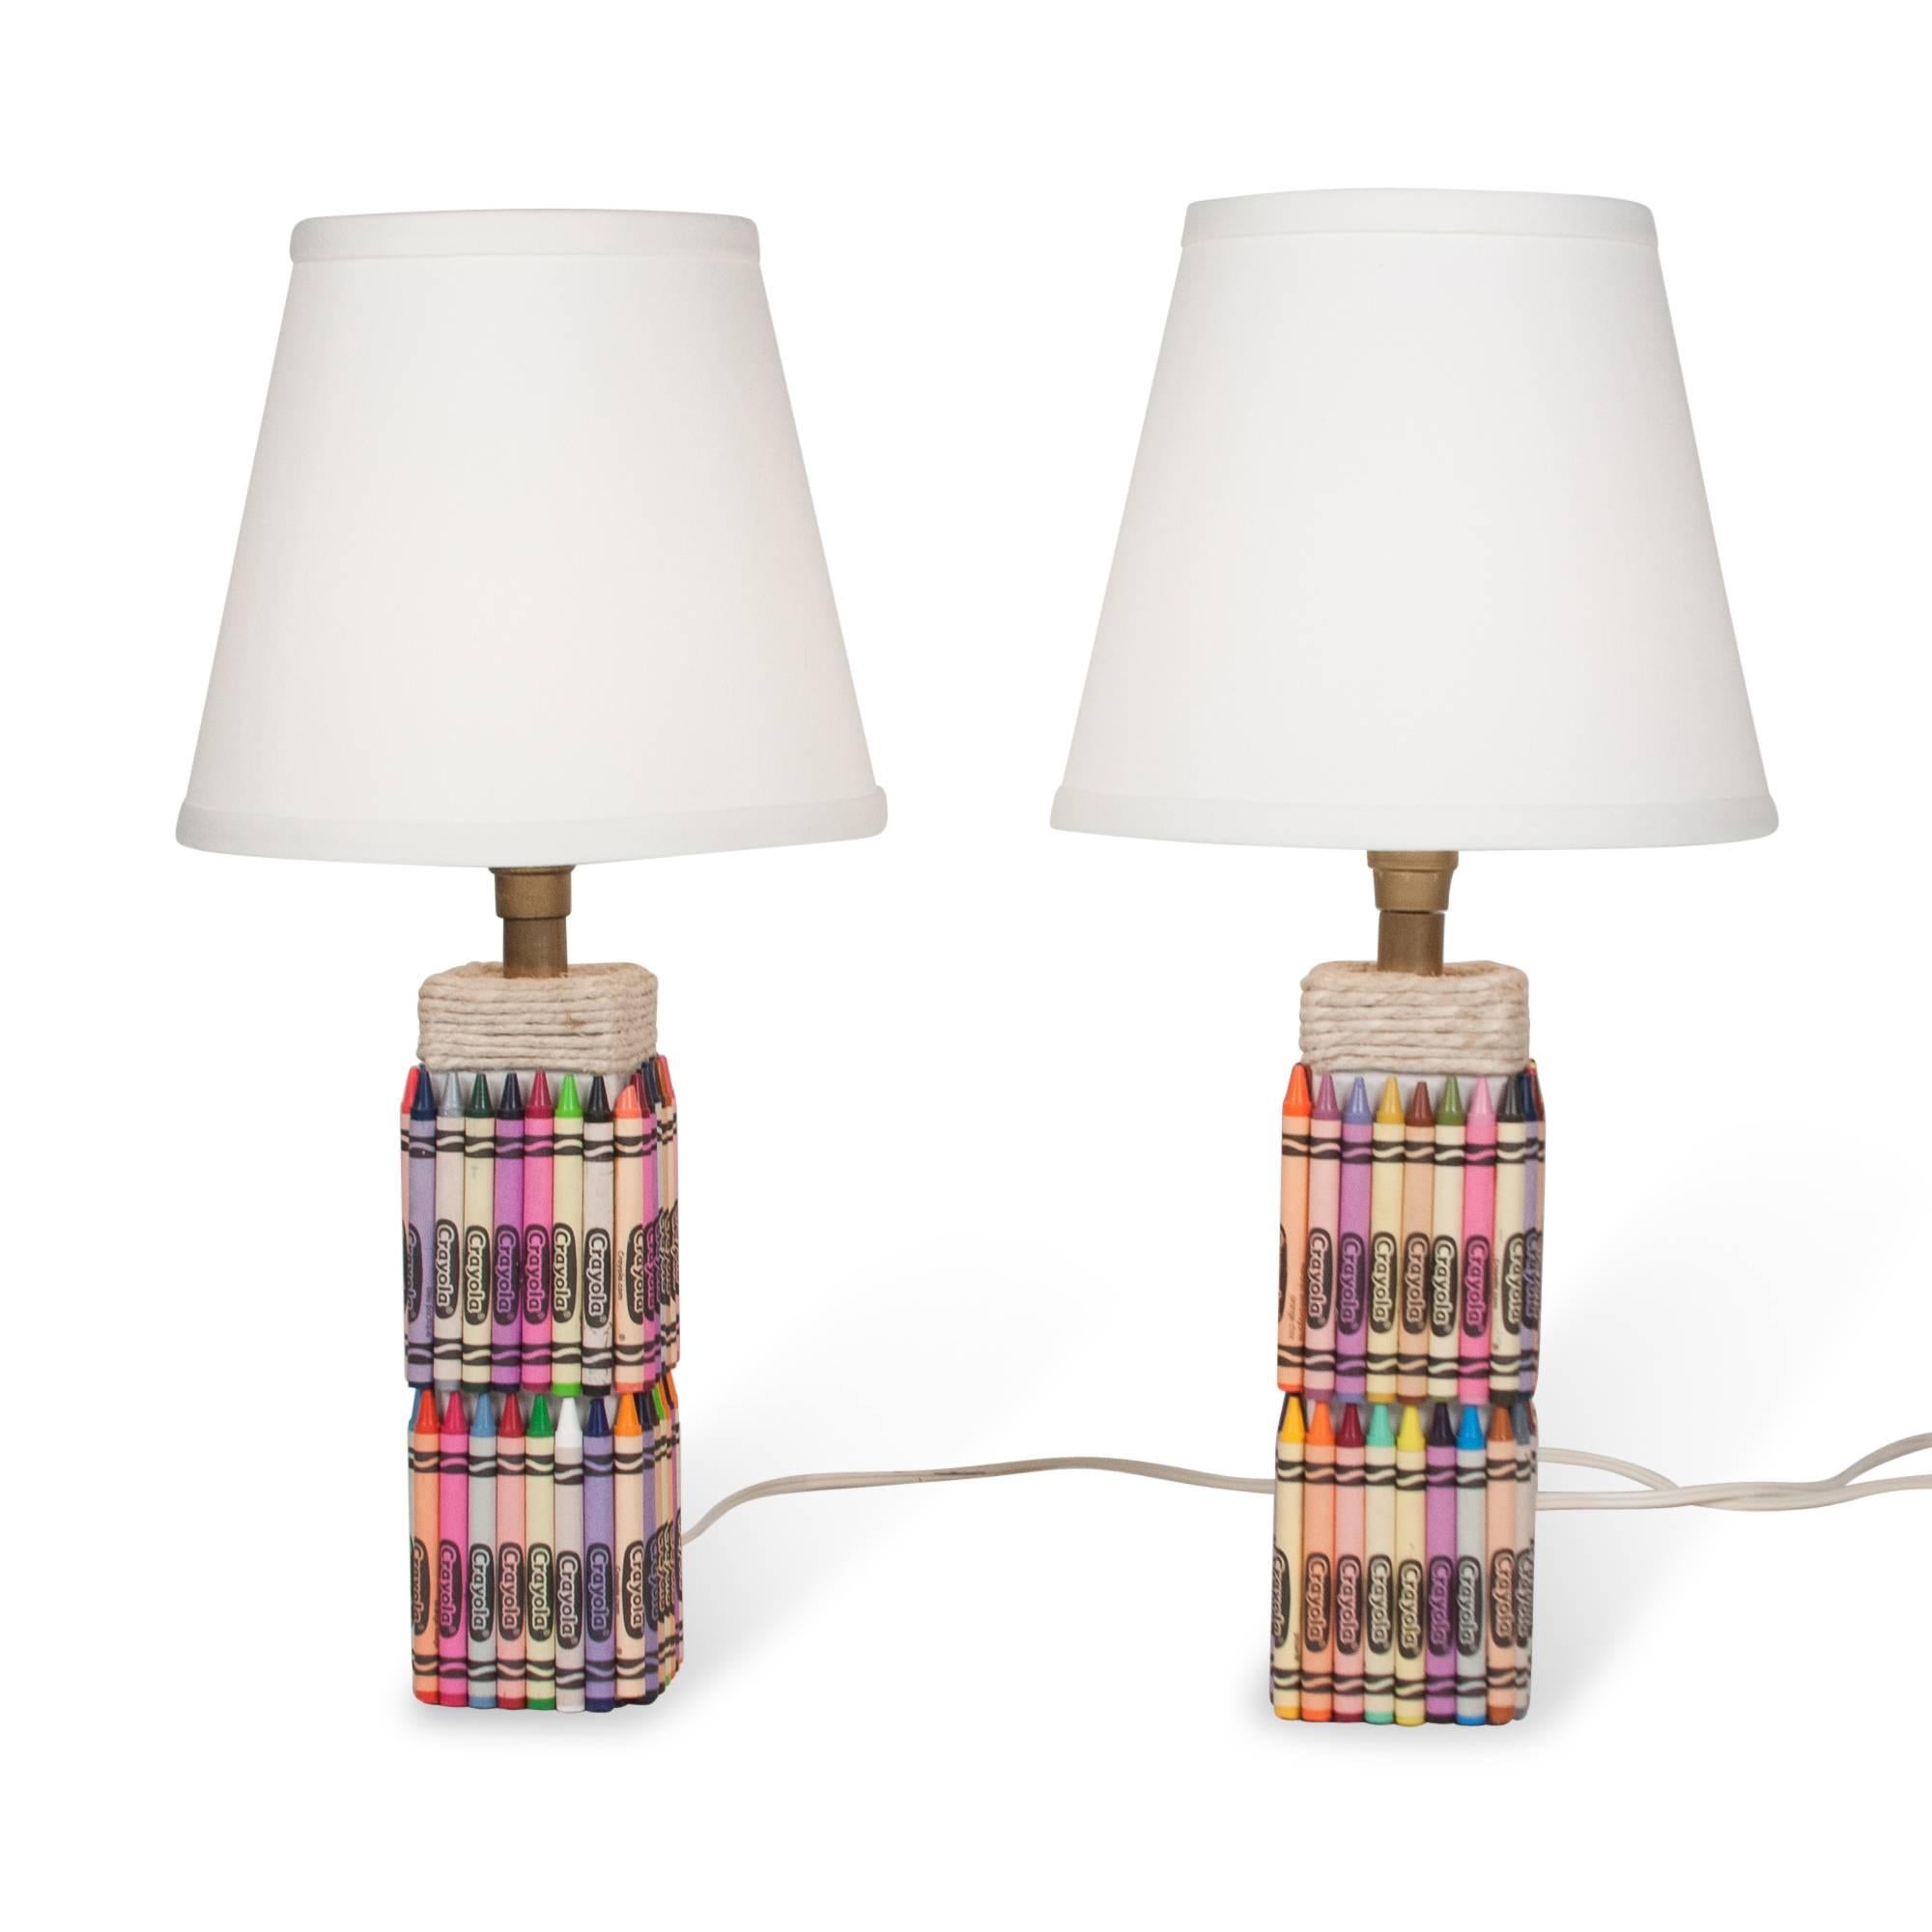 Pair of crayon table lamps, square ceramic form with Crayola brand crayons of assorted colors applied to surface, with wrapped rope at top of base, in custom linen shade, American, 2000s. Measures: Overall height 16 1/2 in, base is 3 in square.